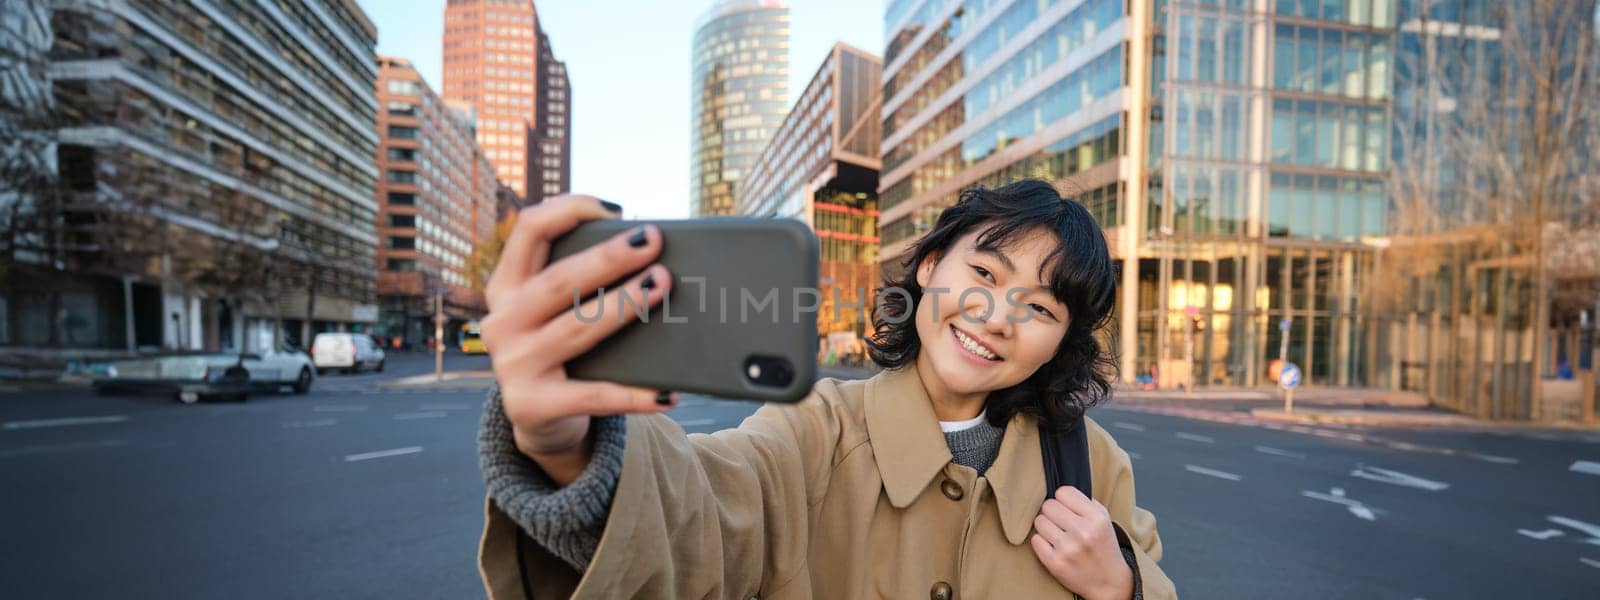 Portrait of young asian woman taking selfie in front of building in city centre, tourist takes photos while sightseeing, smiling at smartphone camera by Benzoix